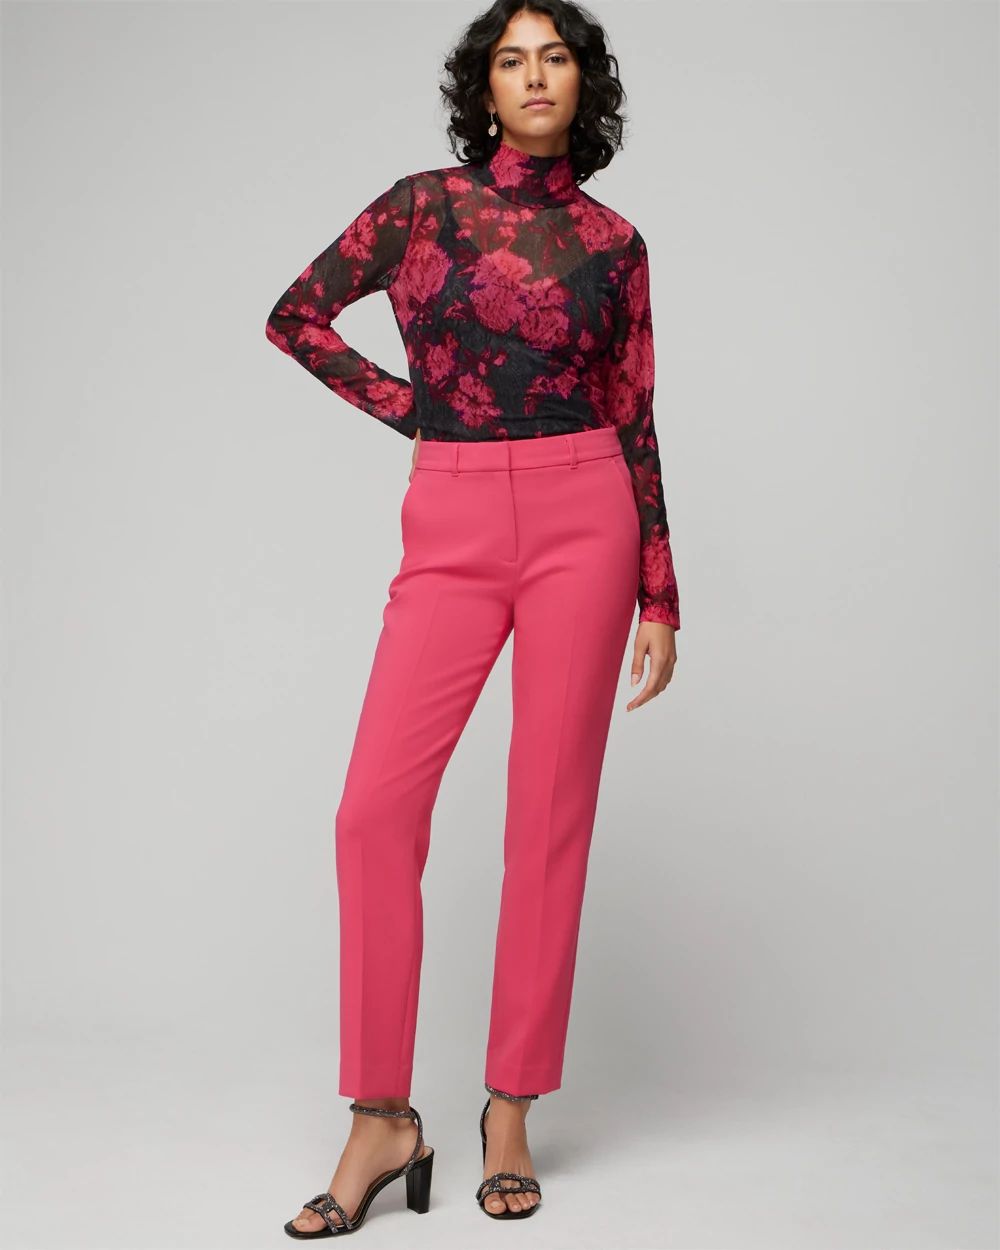 WHBM® Elle Slim Ankle Luxe Double Weave Pants click to view larger image.